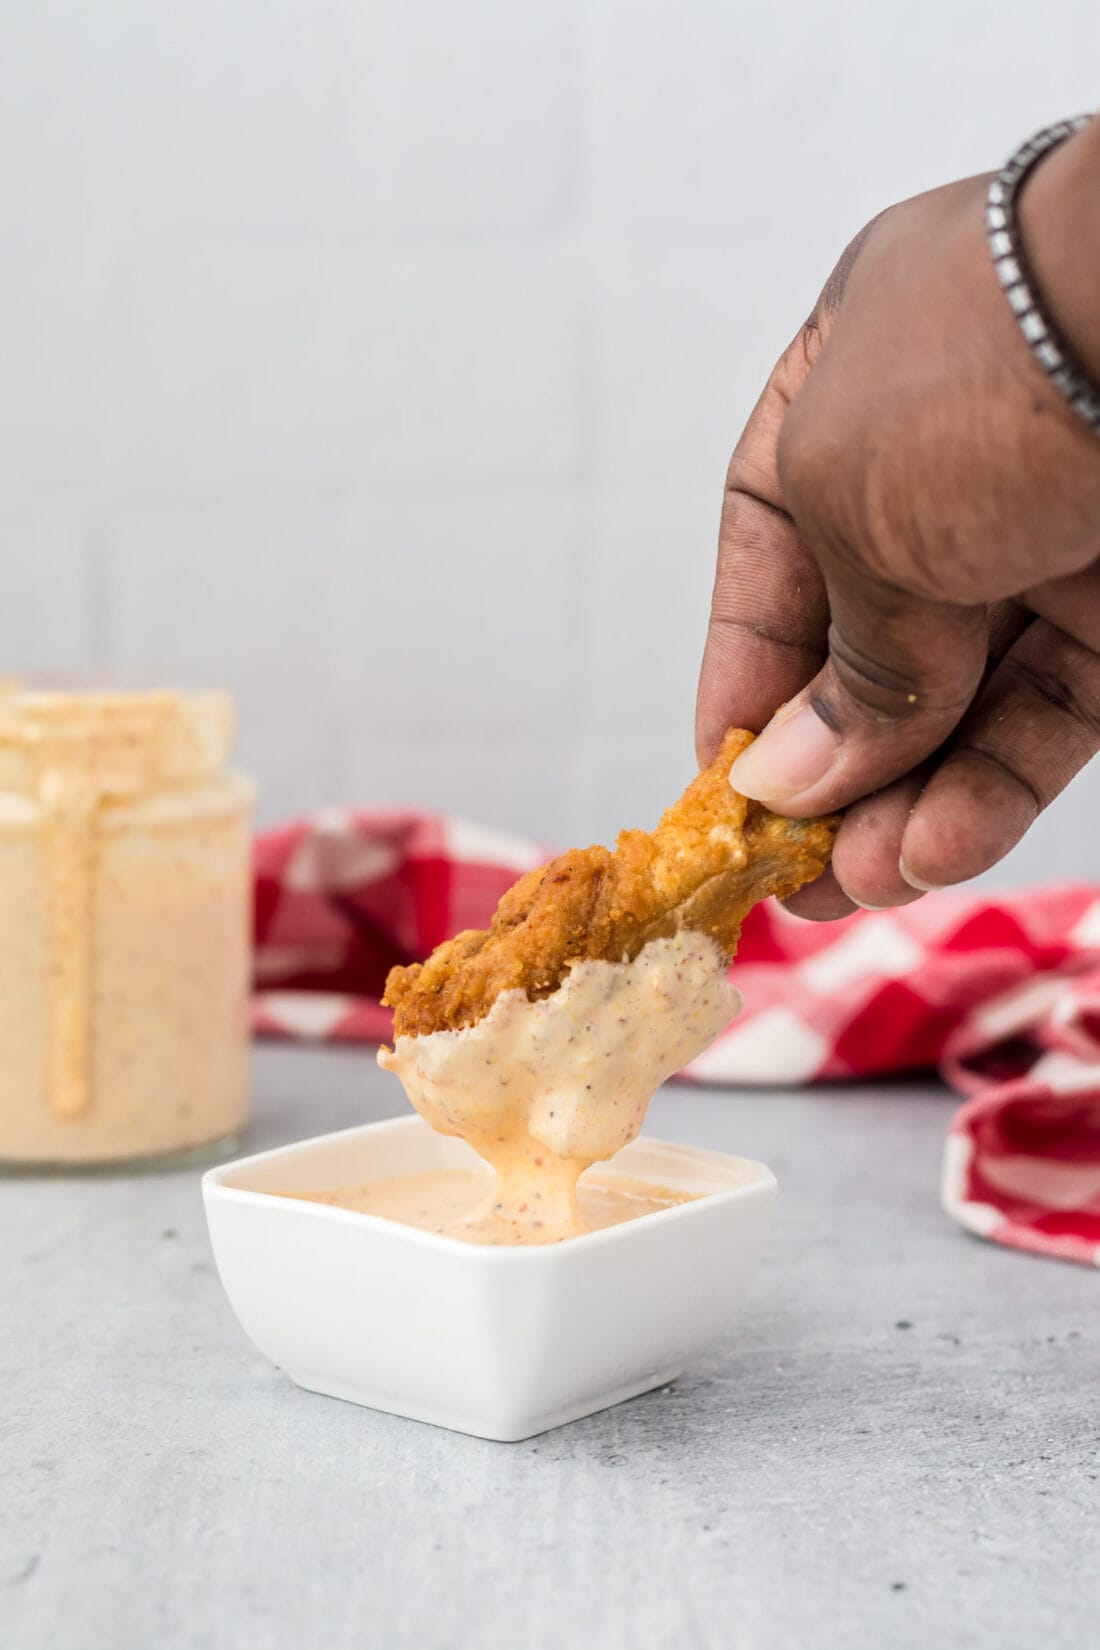 dipping chicken wing into Alabama White Sauce